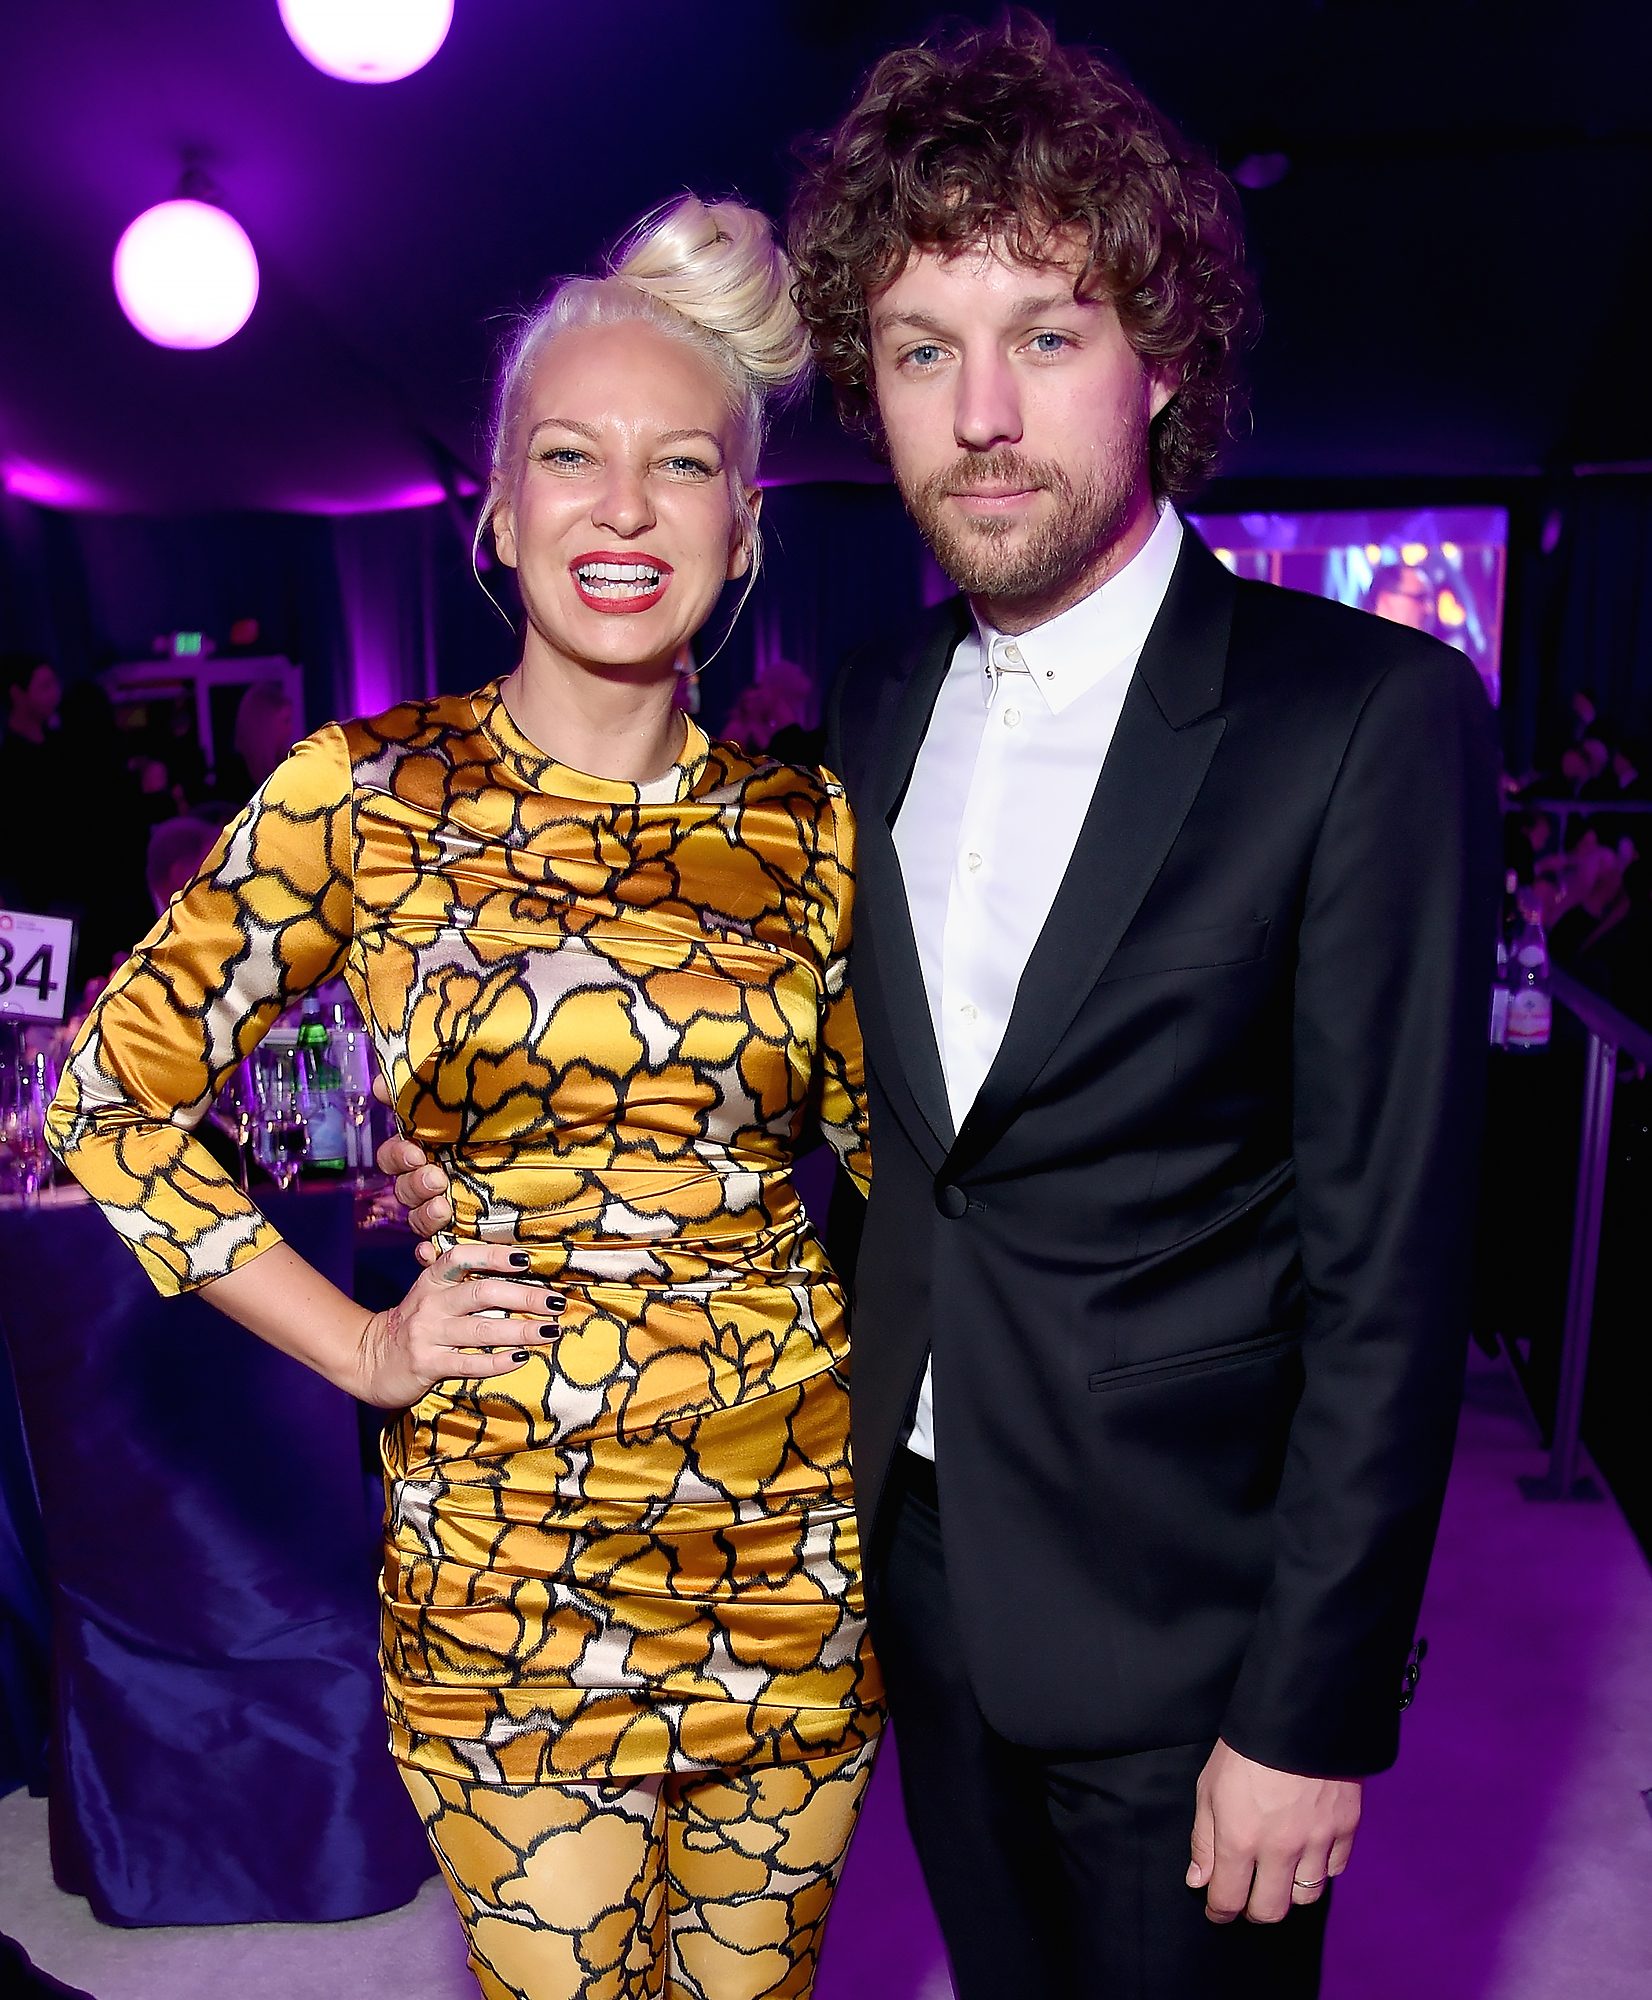 Sia Felt ‘Severely Depressed’ After Erik Anders Lang Divorce, Barely Got Out of Bed for 3 Years